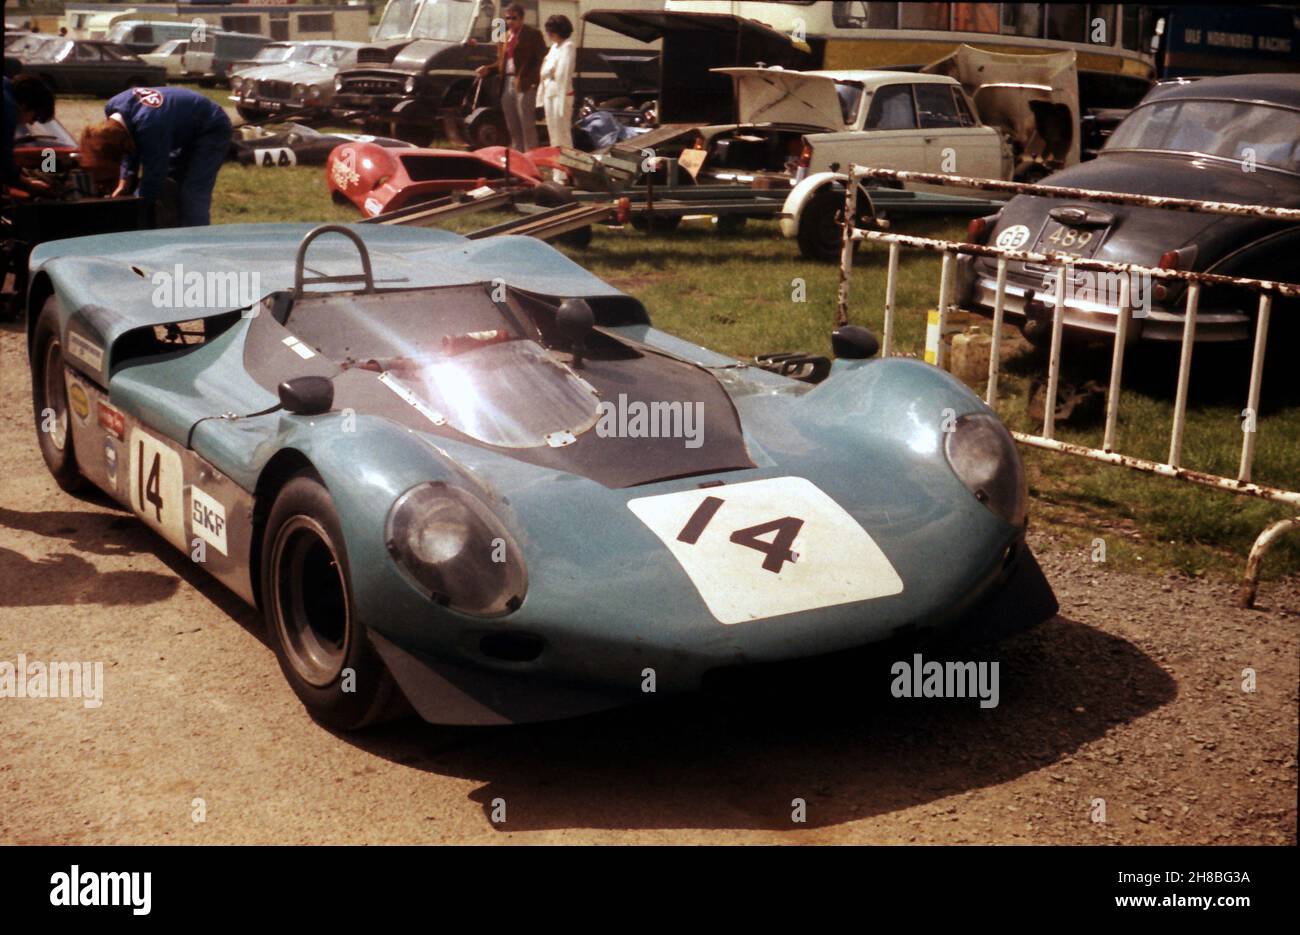 Les Aylott's Ardua spyder, but in the race programme as a GT. The car was entered under the R A F S M A and Les Aylott was an RAF Officer. The car finished  3rd overall in race 1, scheduled to start at 2:30pm at the BRSCC organised Whit Monday meeting, May 25th 1970. Stock Photo